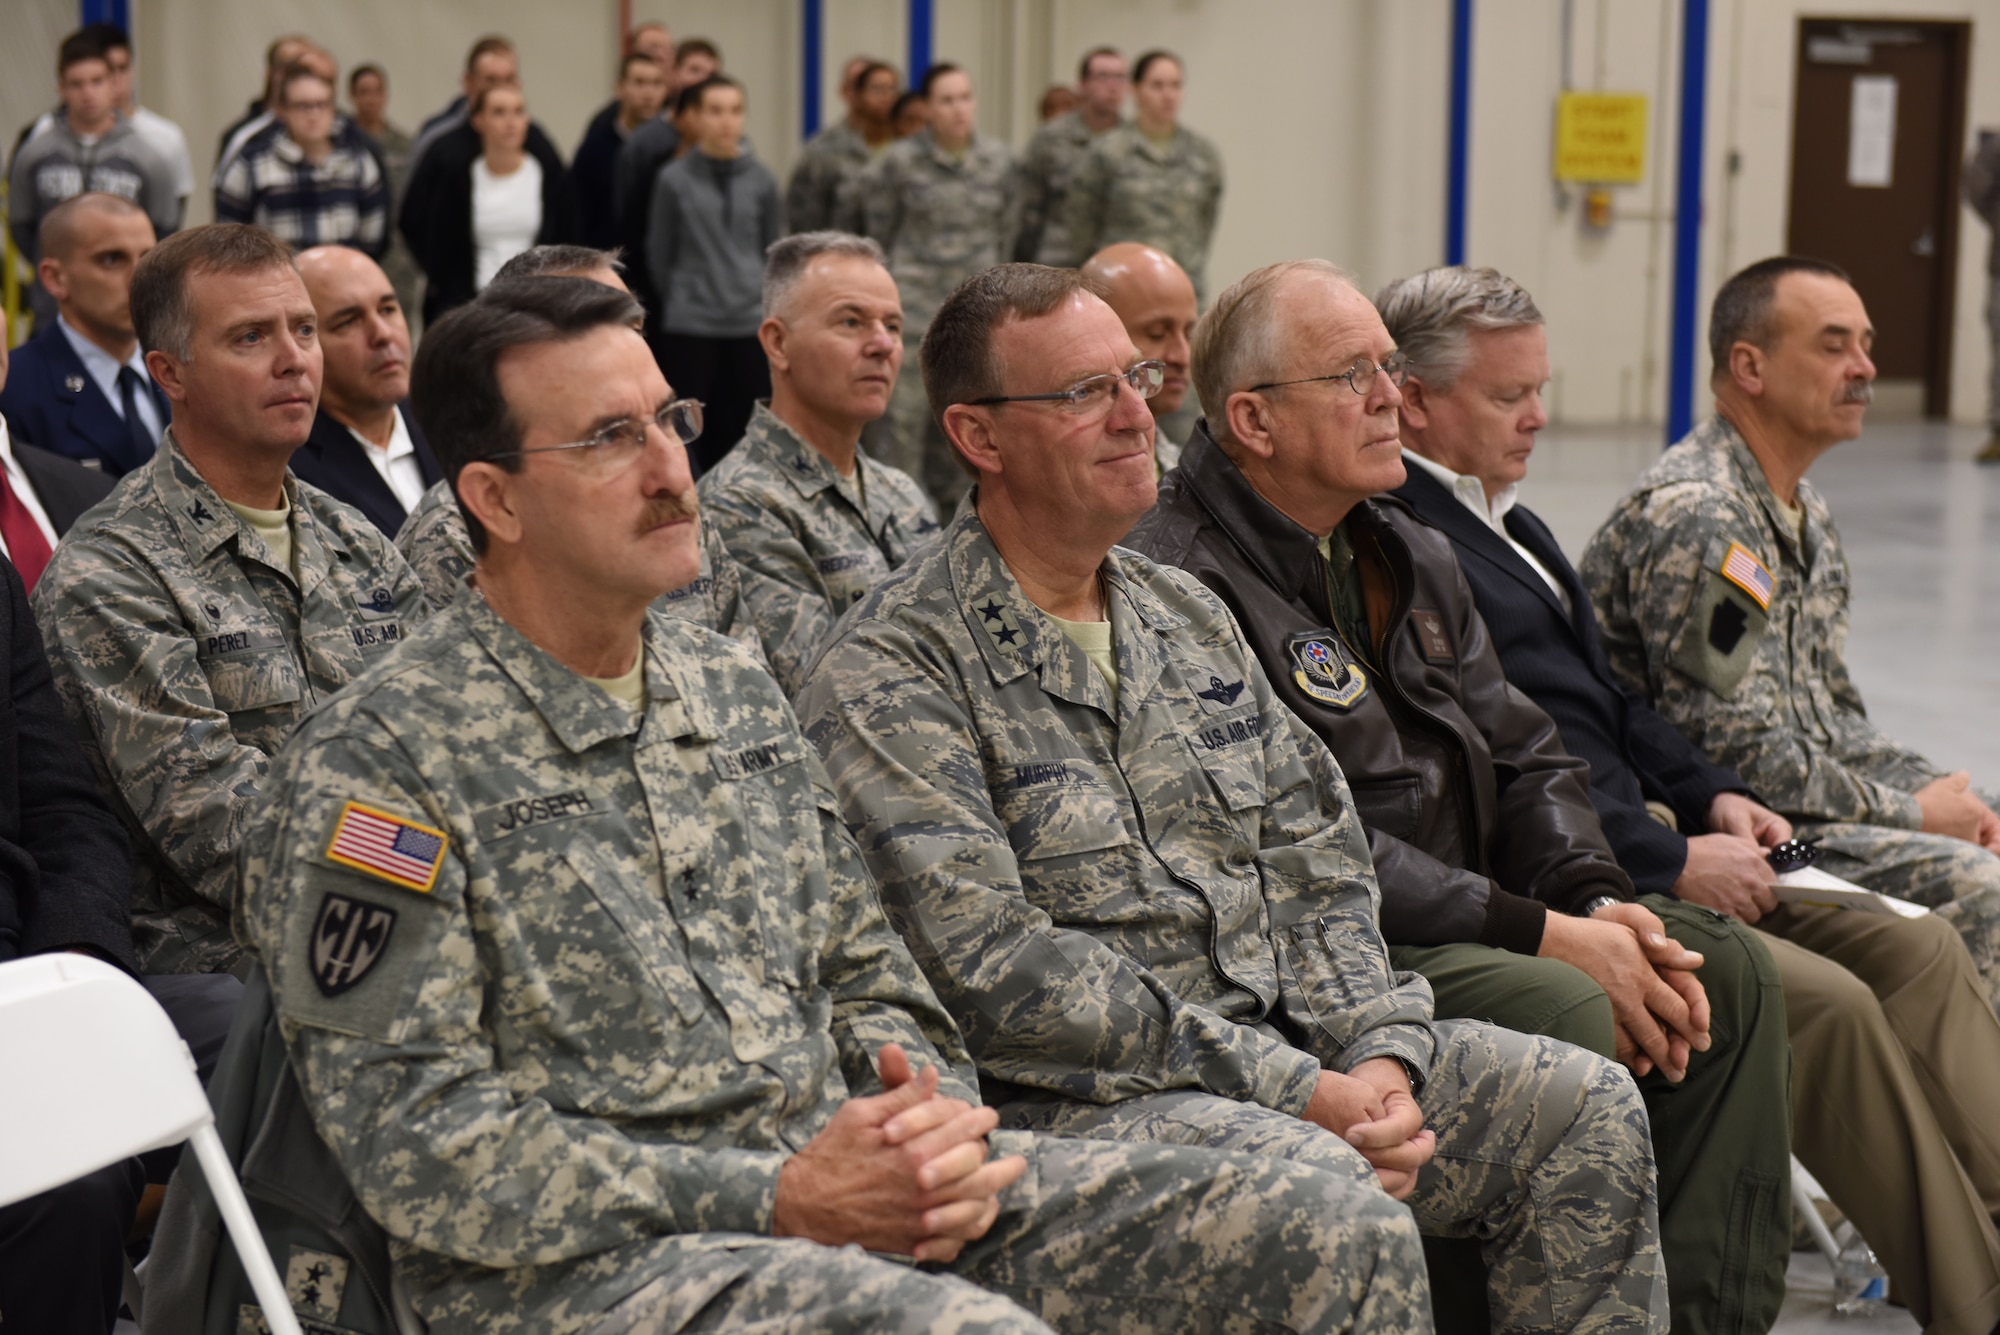 (From left to right) Army Maj. Gen. James Joseph, Pennsylvania adjutant general; Maj. Gen. John Murphy, assistant adjutant general, Pennsylvania Air National Guard; and Maj. Gen. Eric Weller, U.S. Special Operations Command deputy commander of mobilization and reserve affairs (and former commander of the 193rd Special Operations Wing), show their support for Col. Benjamin (Mike) Cason as he assumes command of the 193rd SOW, during a change-of-command ceremony on base Nov. 14. Cason is the first dual-status commander of an Air Force Special Operations Command unit. (U.S. Air National Guard photo by Senior Airman Ethan Carl/Released)